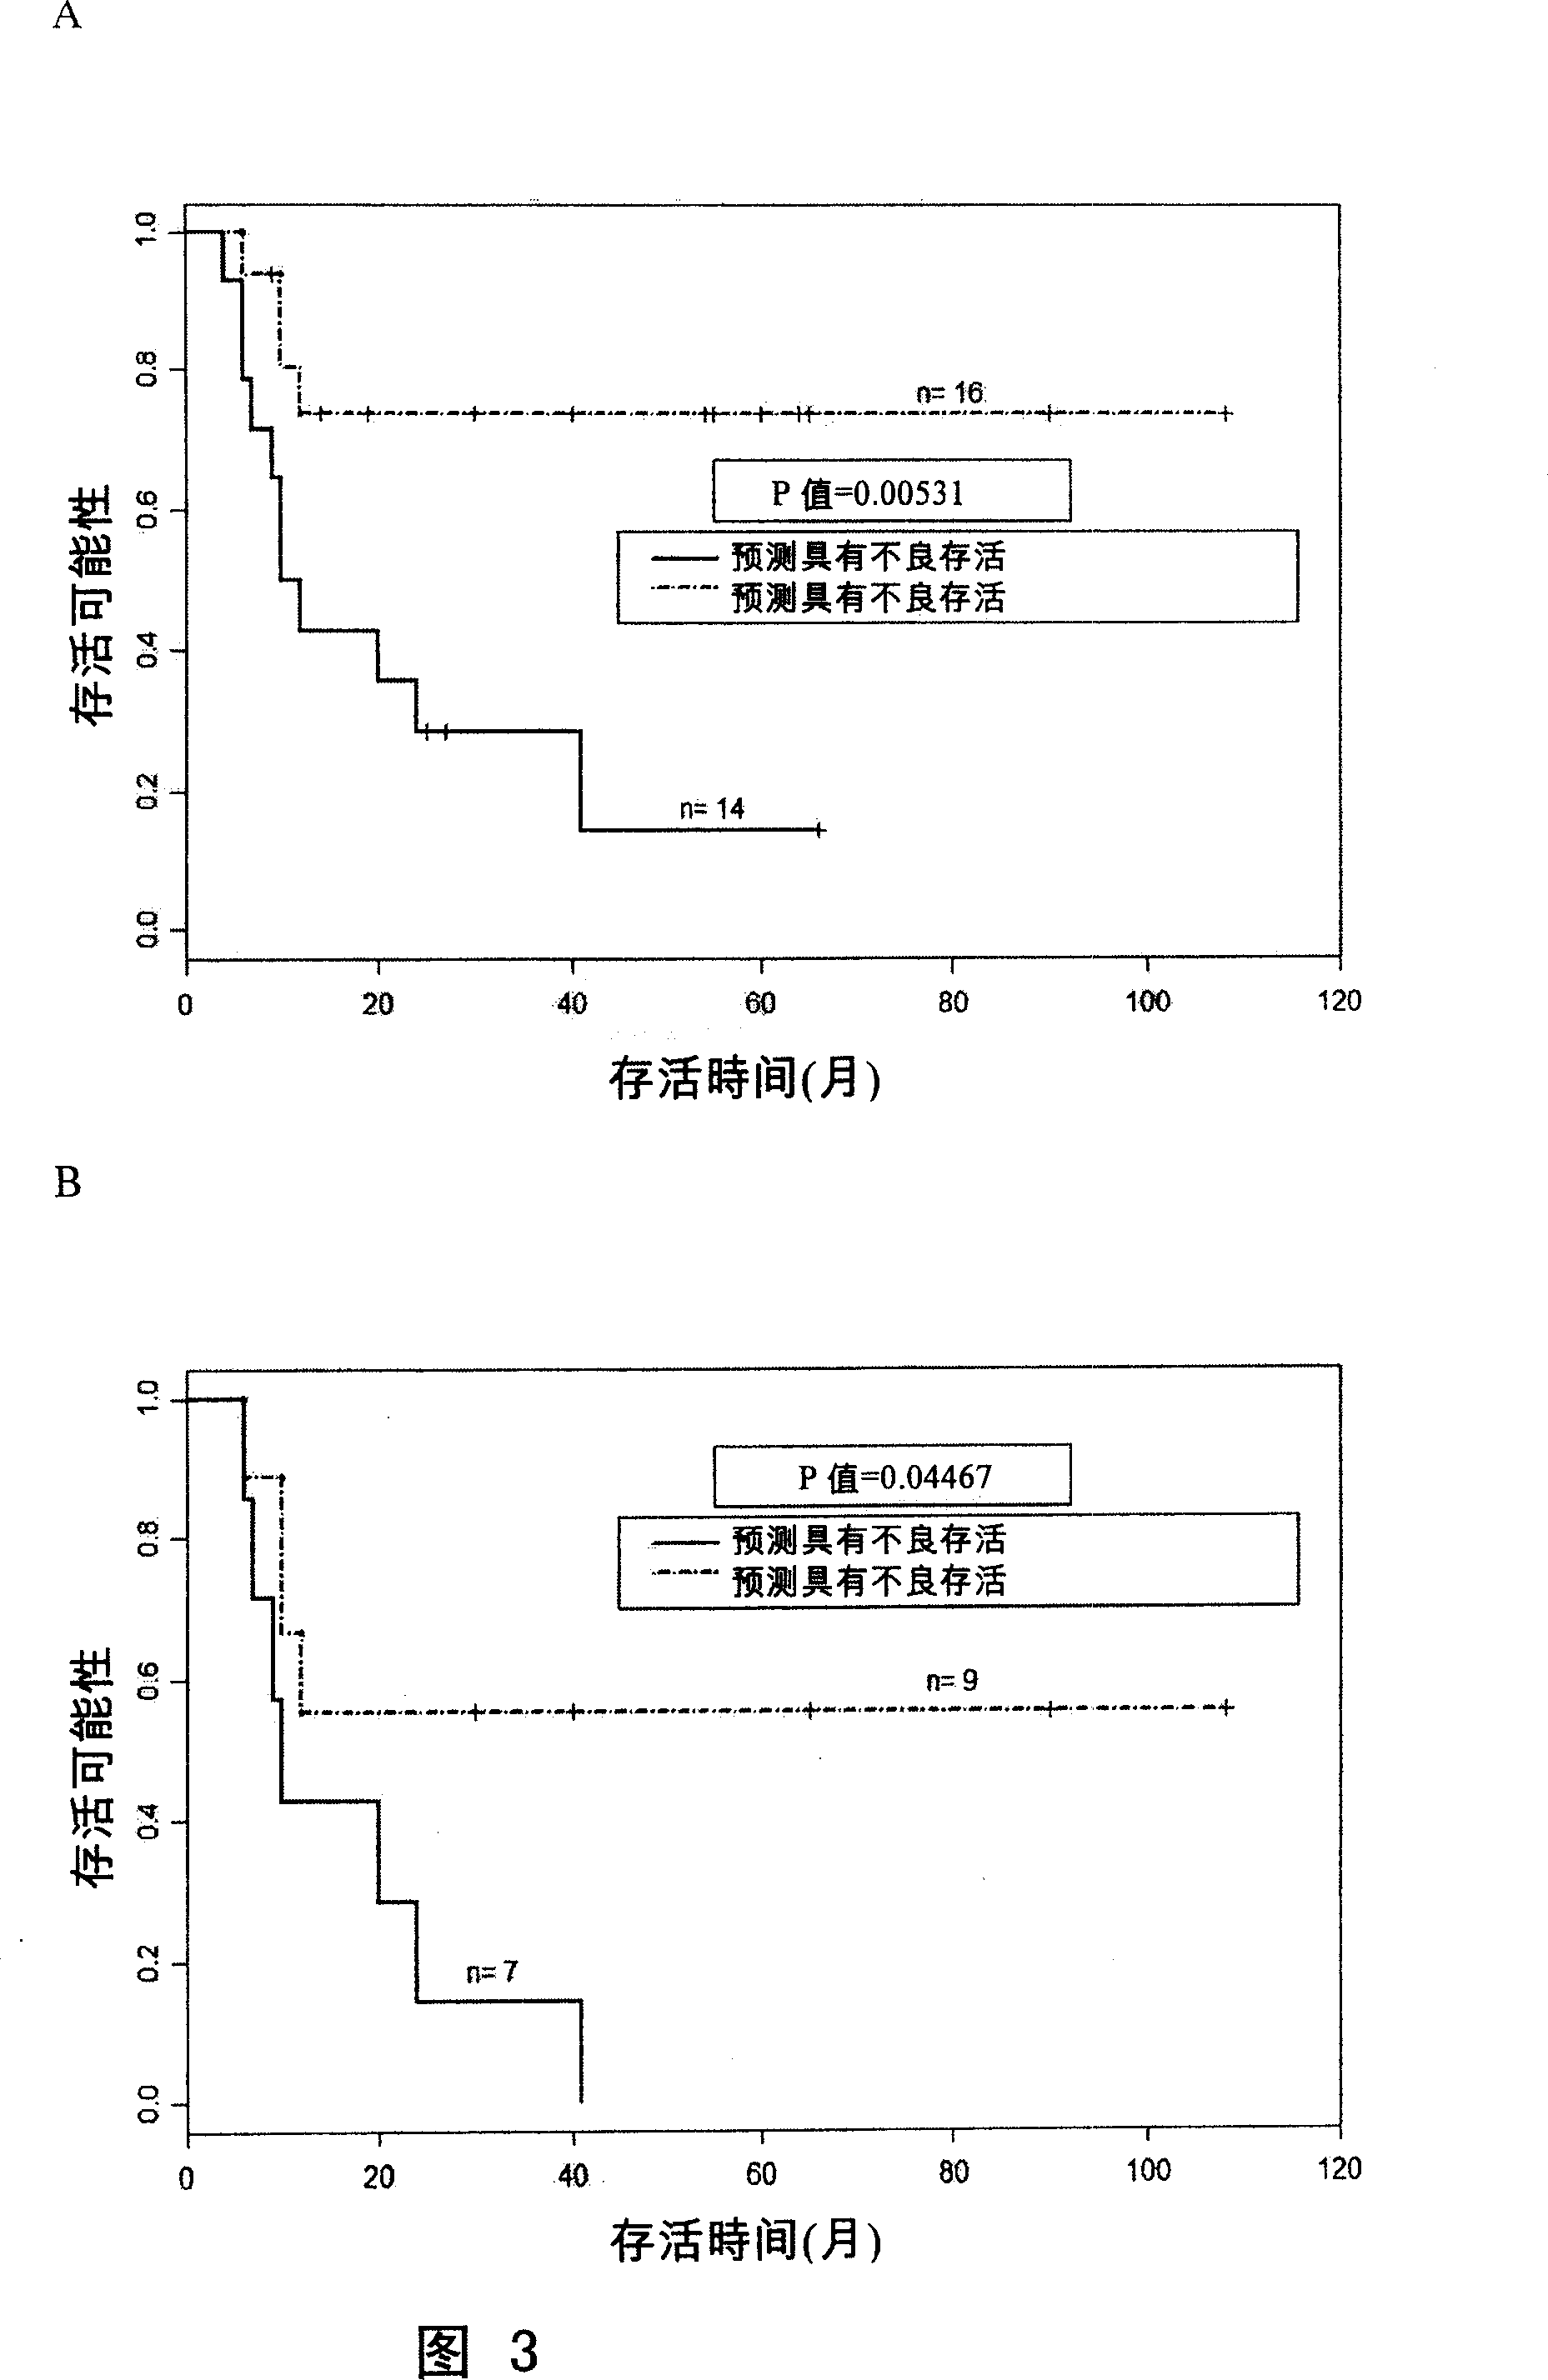 Method of forecasting gastric cancer postoperative survival condition by gene expression atlas